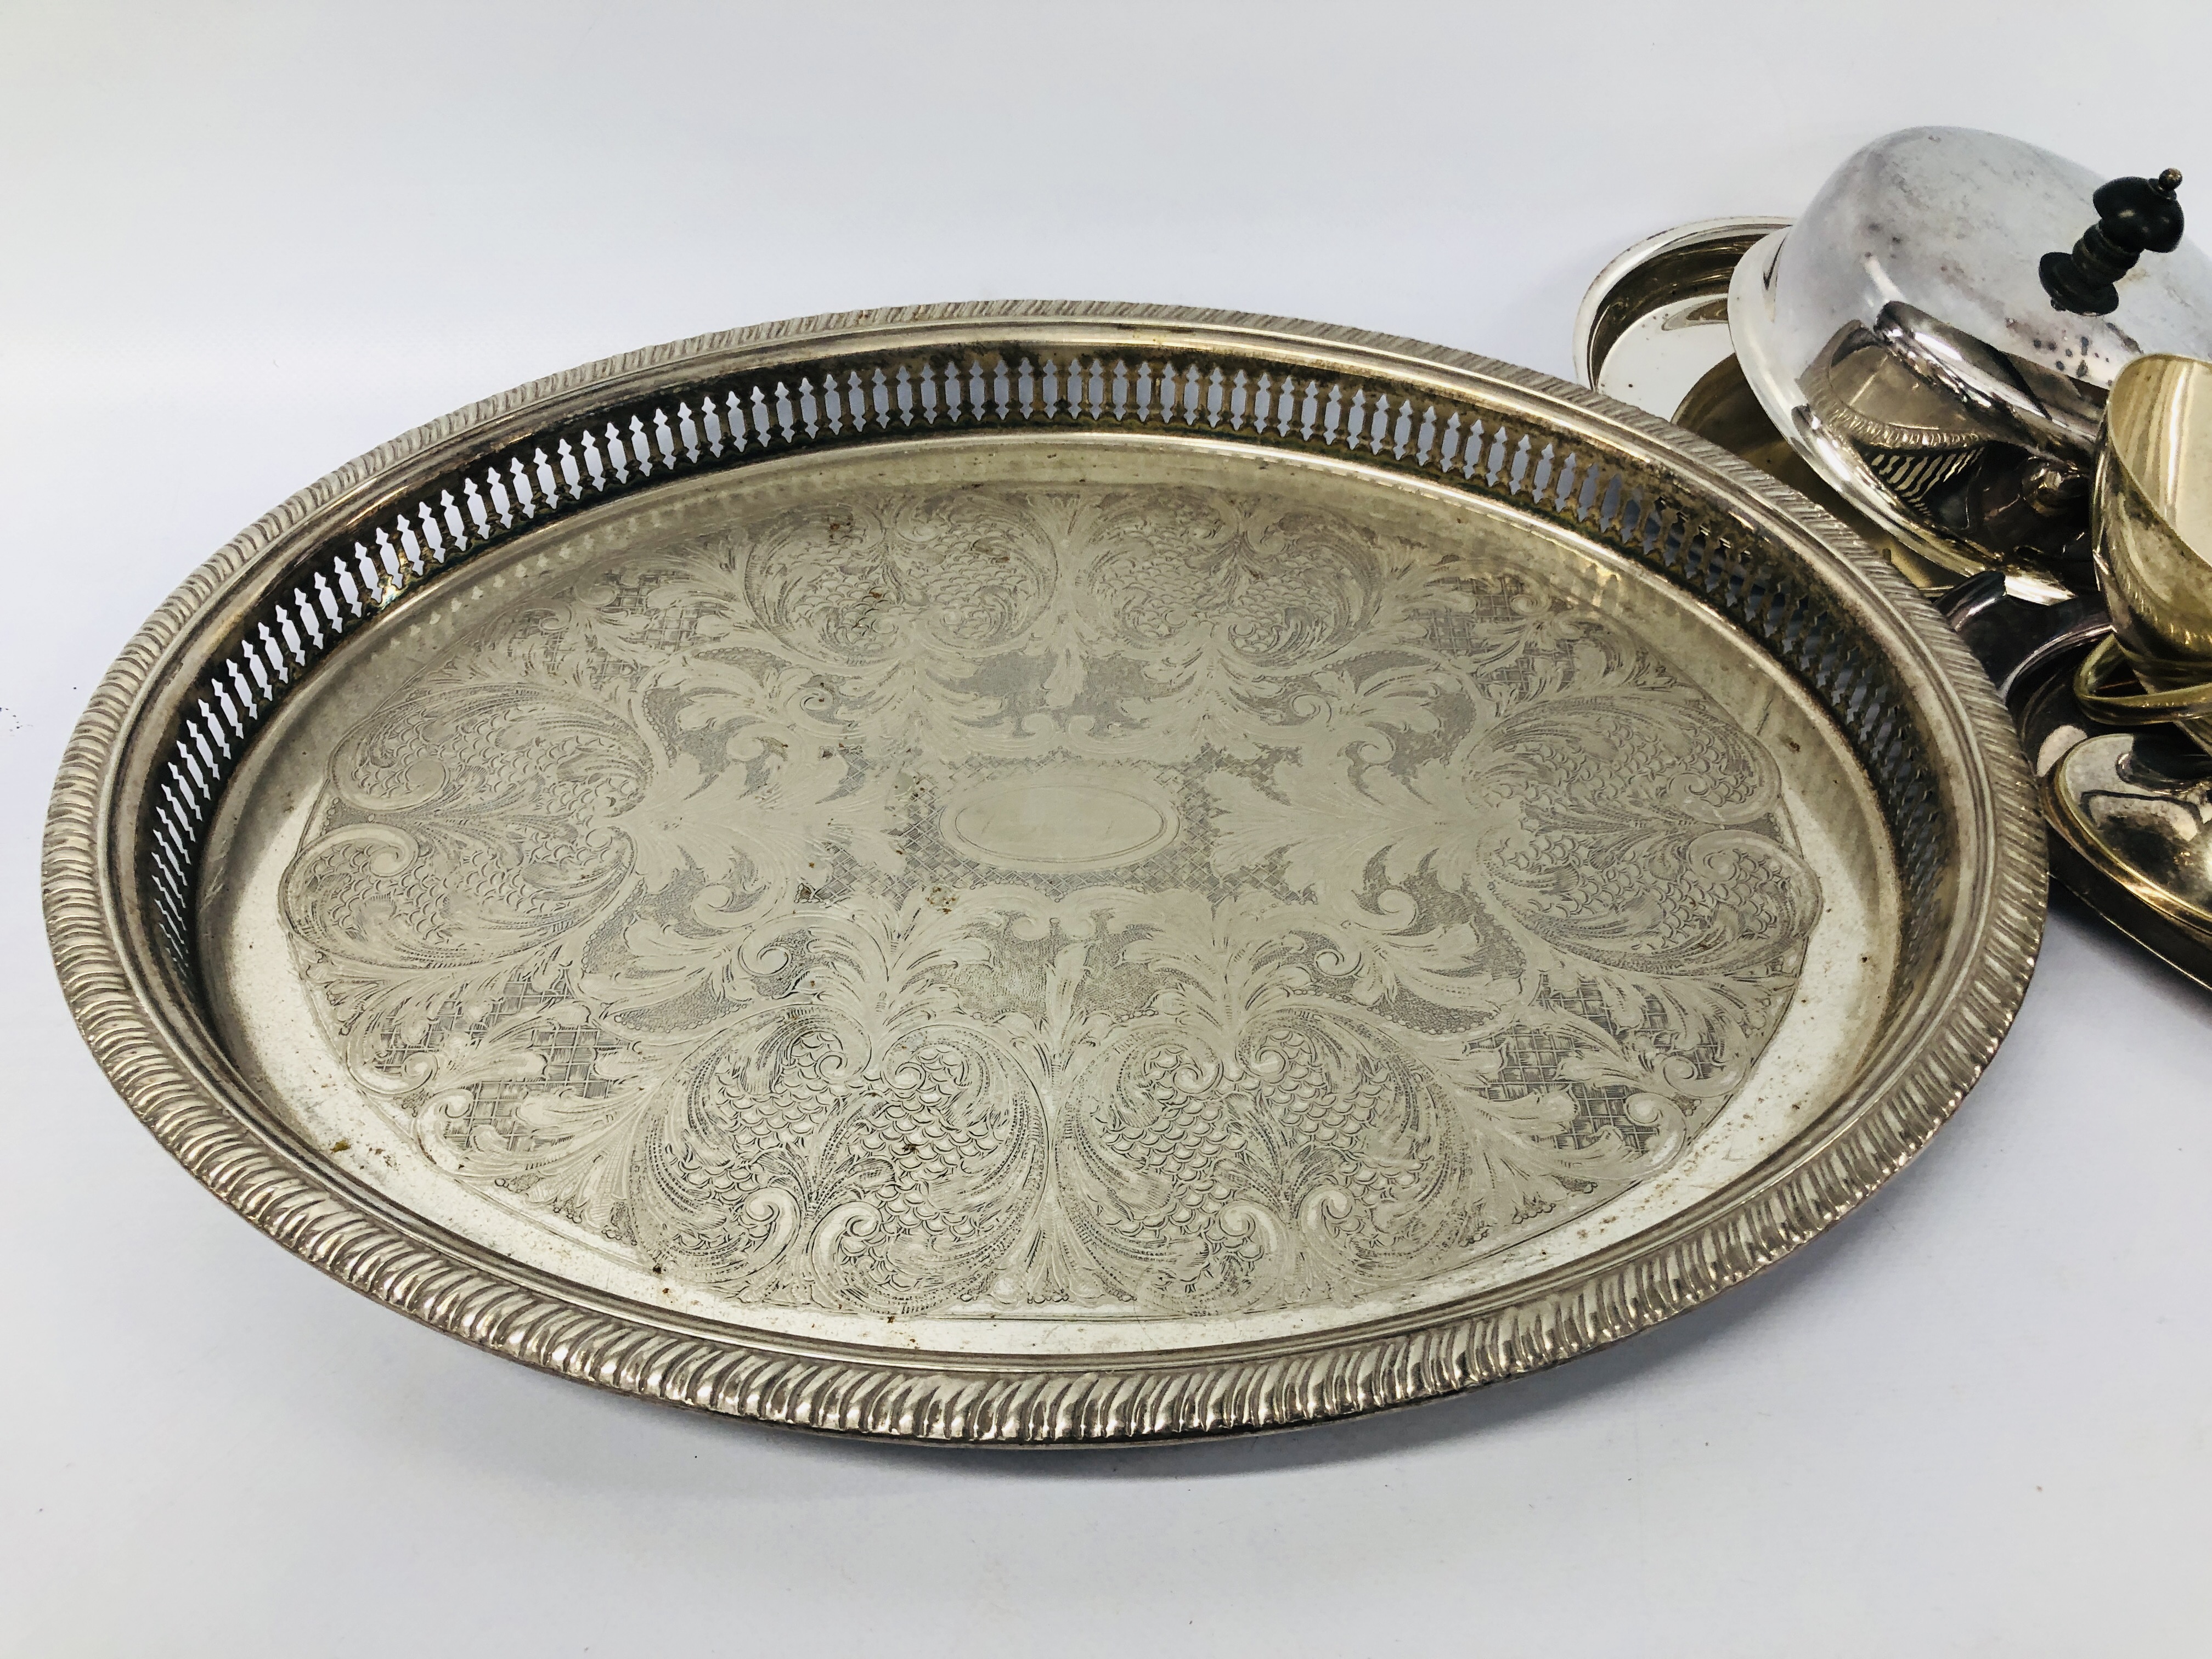 2 BOXES CONTAINING GOOD QUALITY SILVER PLATED WARES TO INCLUDE DOMED COVERS, TRAYS, - Image 14 of 18